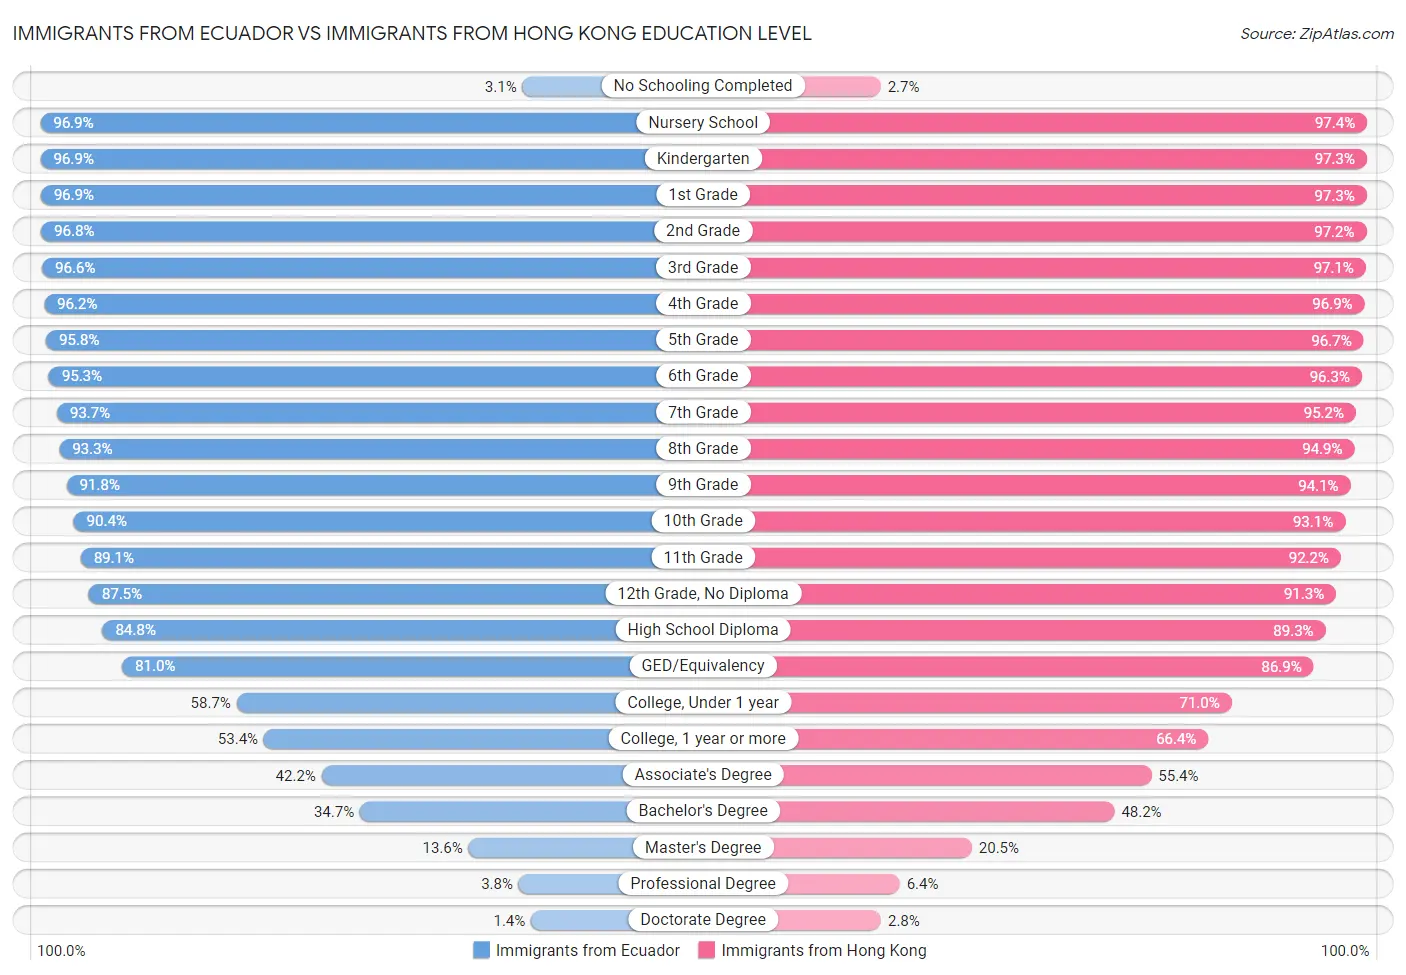 Immigrants from Ecuador vs Immigrants from Hong Kong Education Level